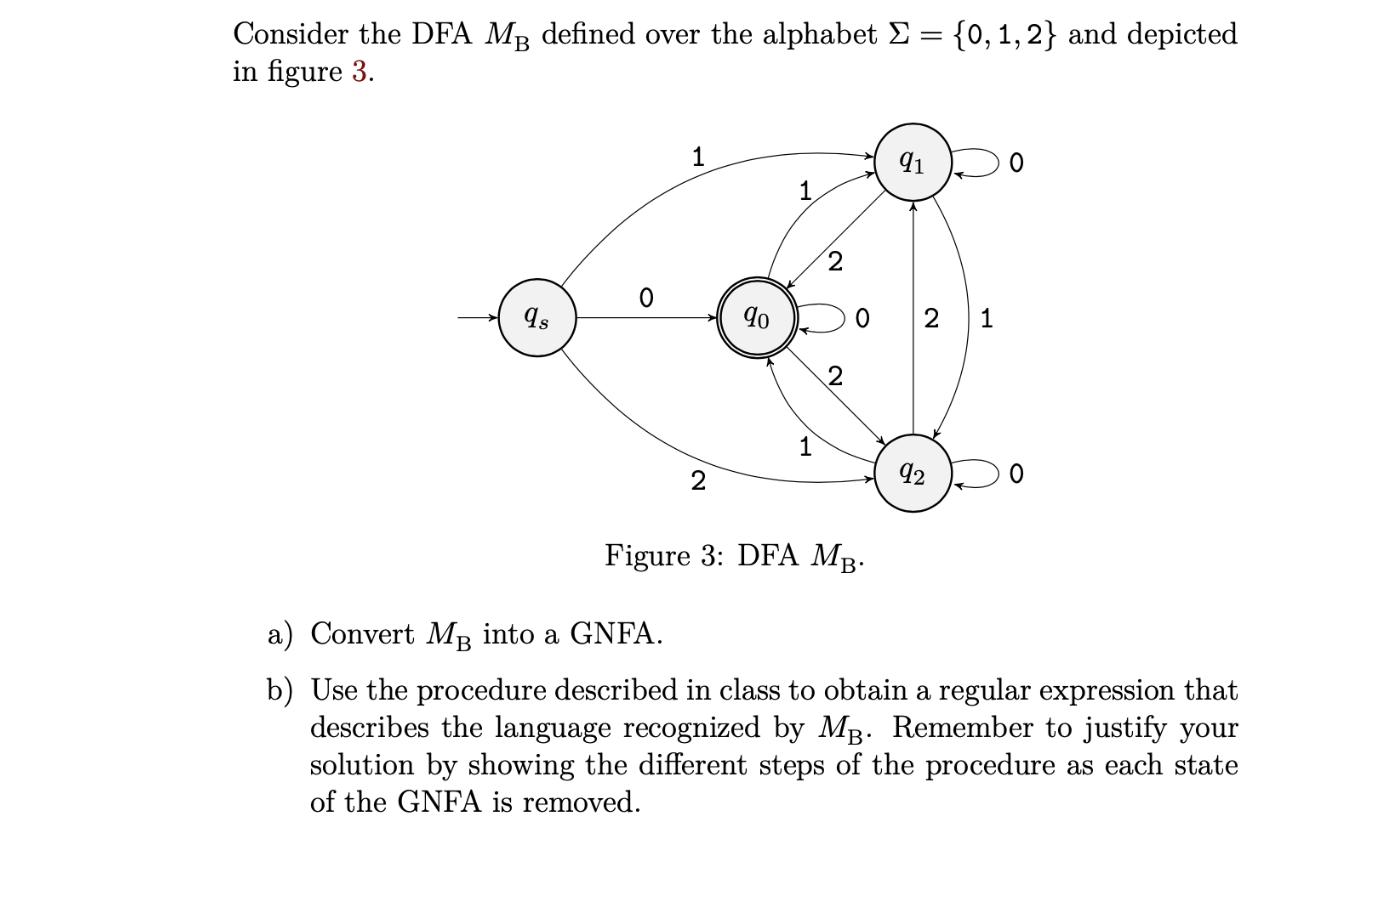 Consider the DFA MB defined over the alphabet  = {0, 1, 2} and depicted in figure 3. qs 0 1 2 90 1 1 2 2